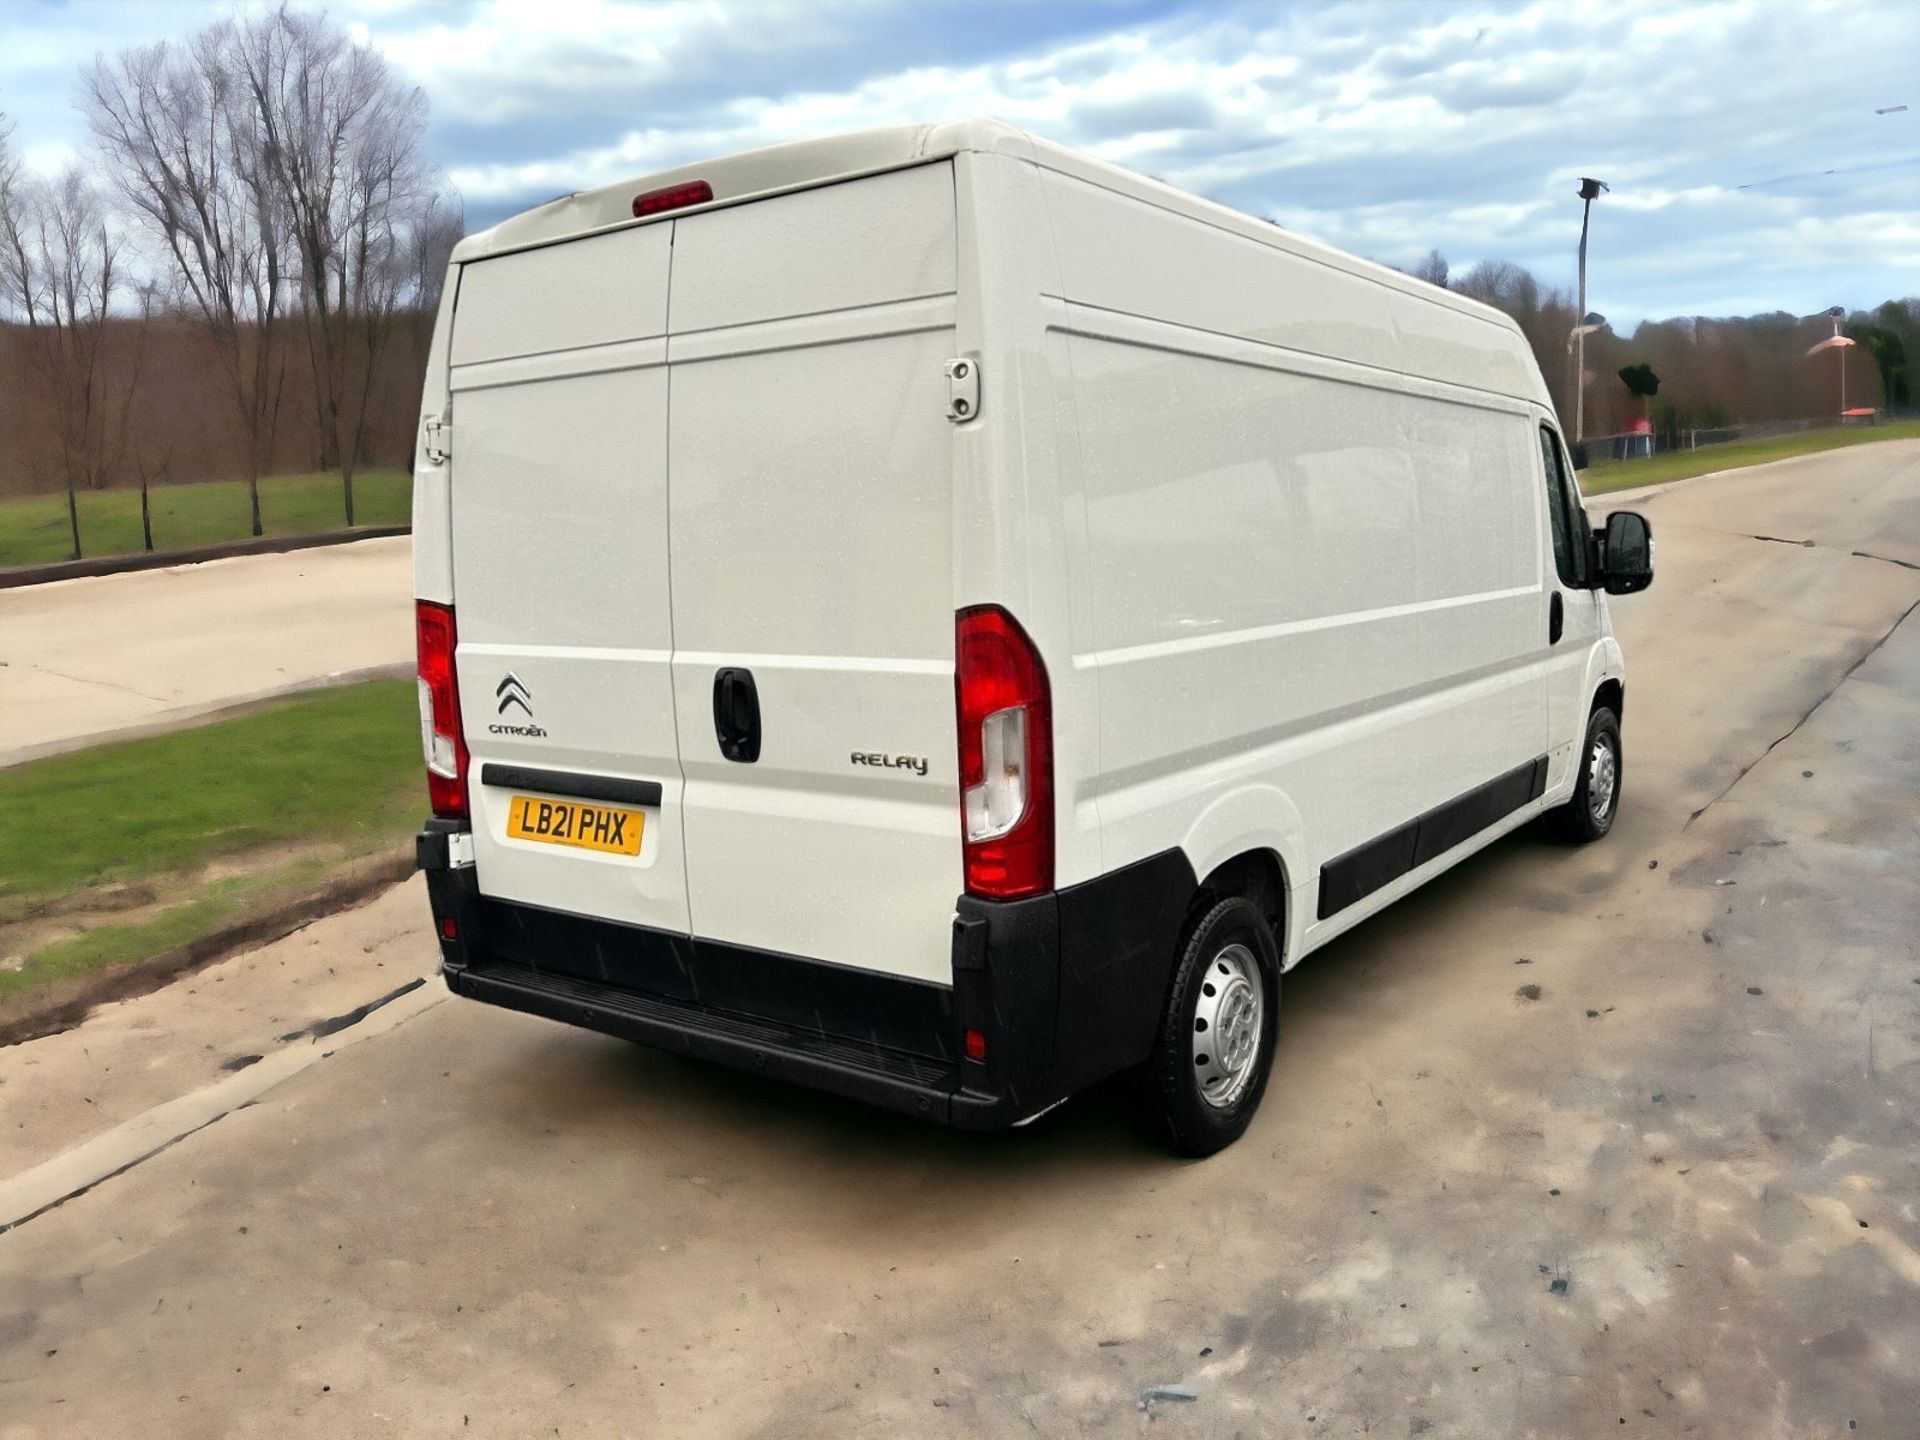 2021-21 REG CITROEN RELAY 35 L3H2 BHDI -HPI CLEAR - READY FOR WORK! - Image 4 of 13